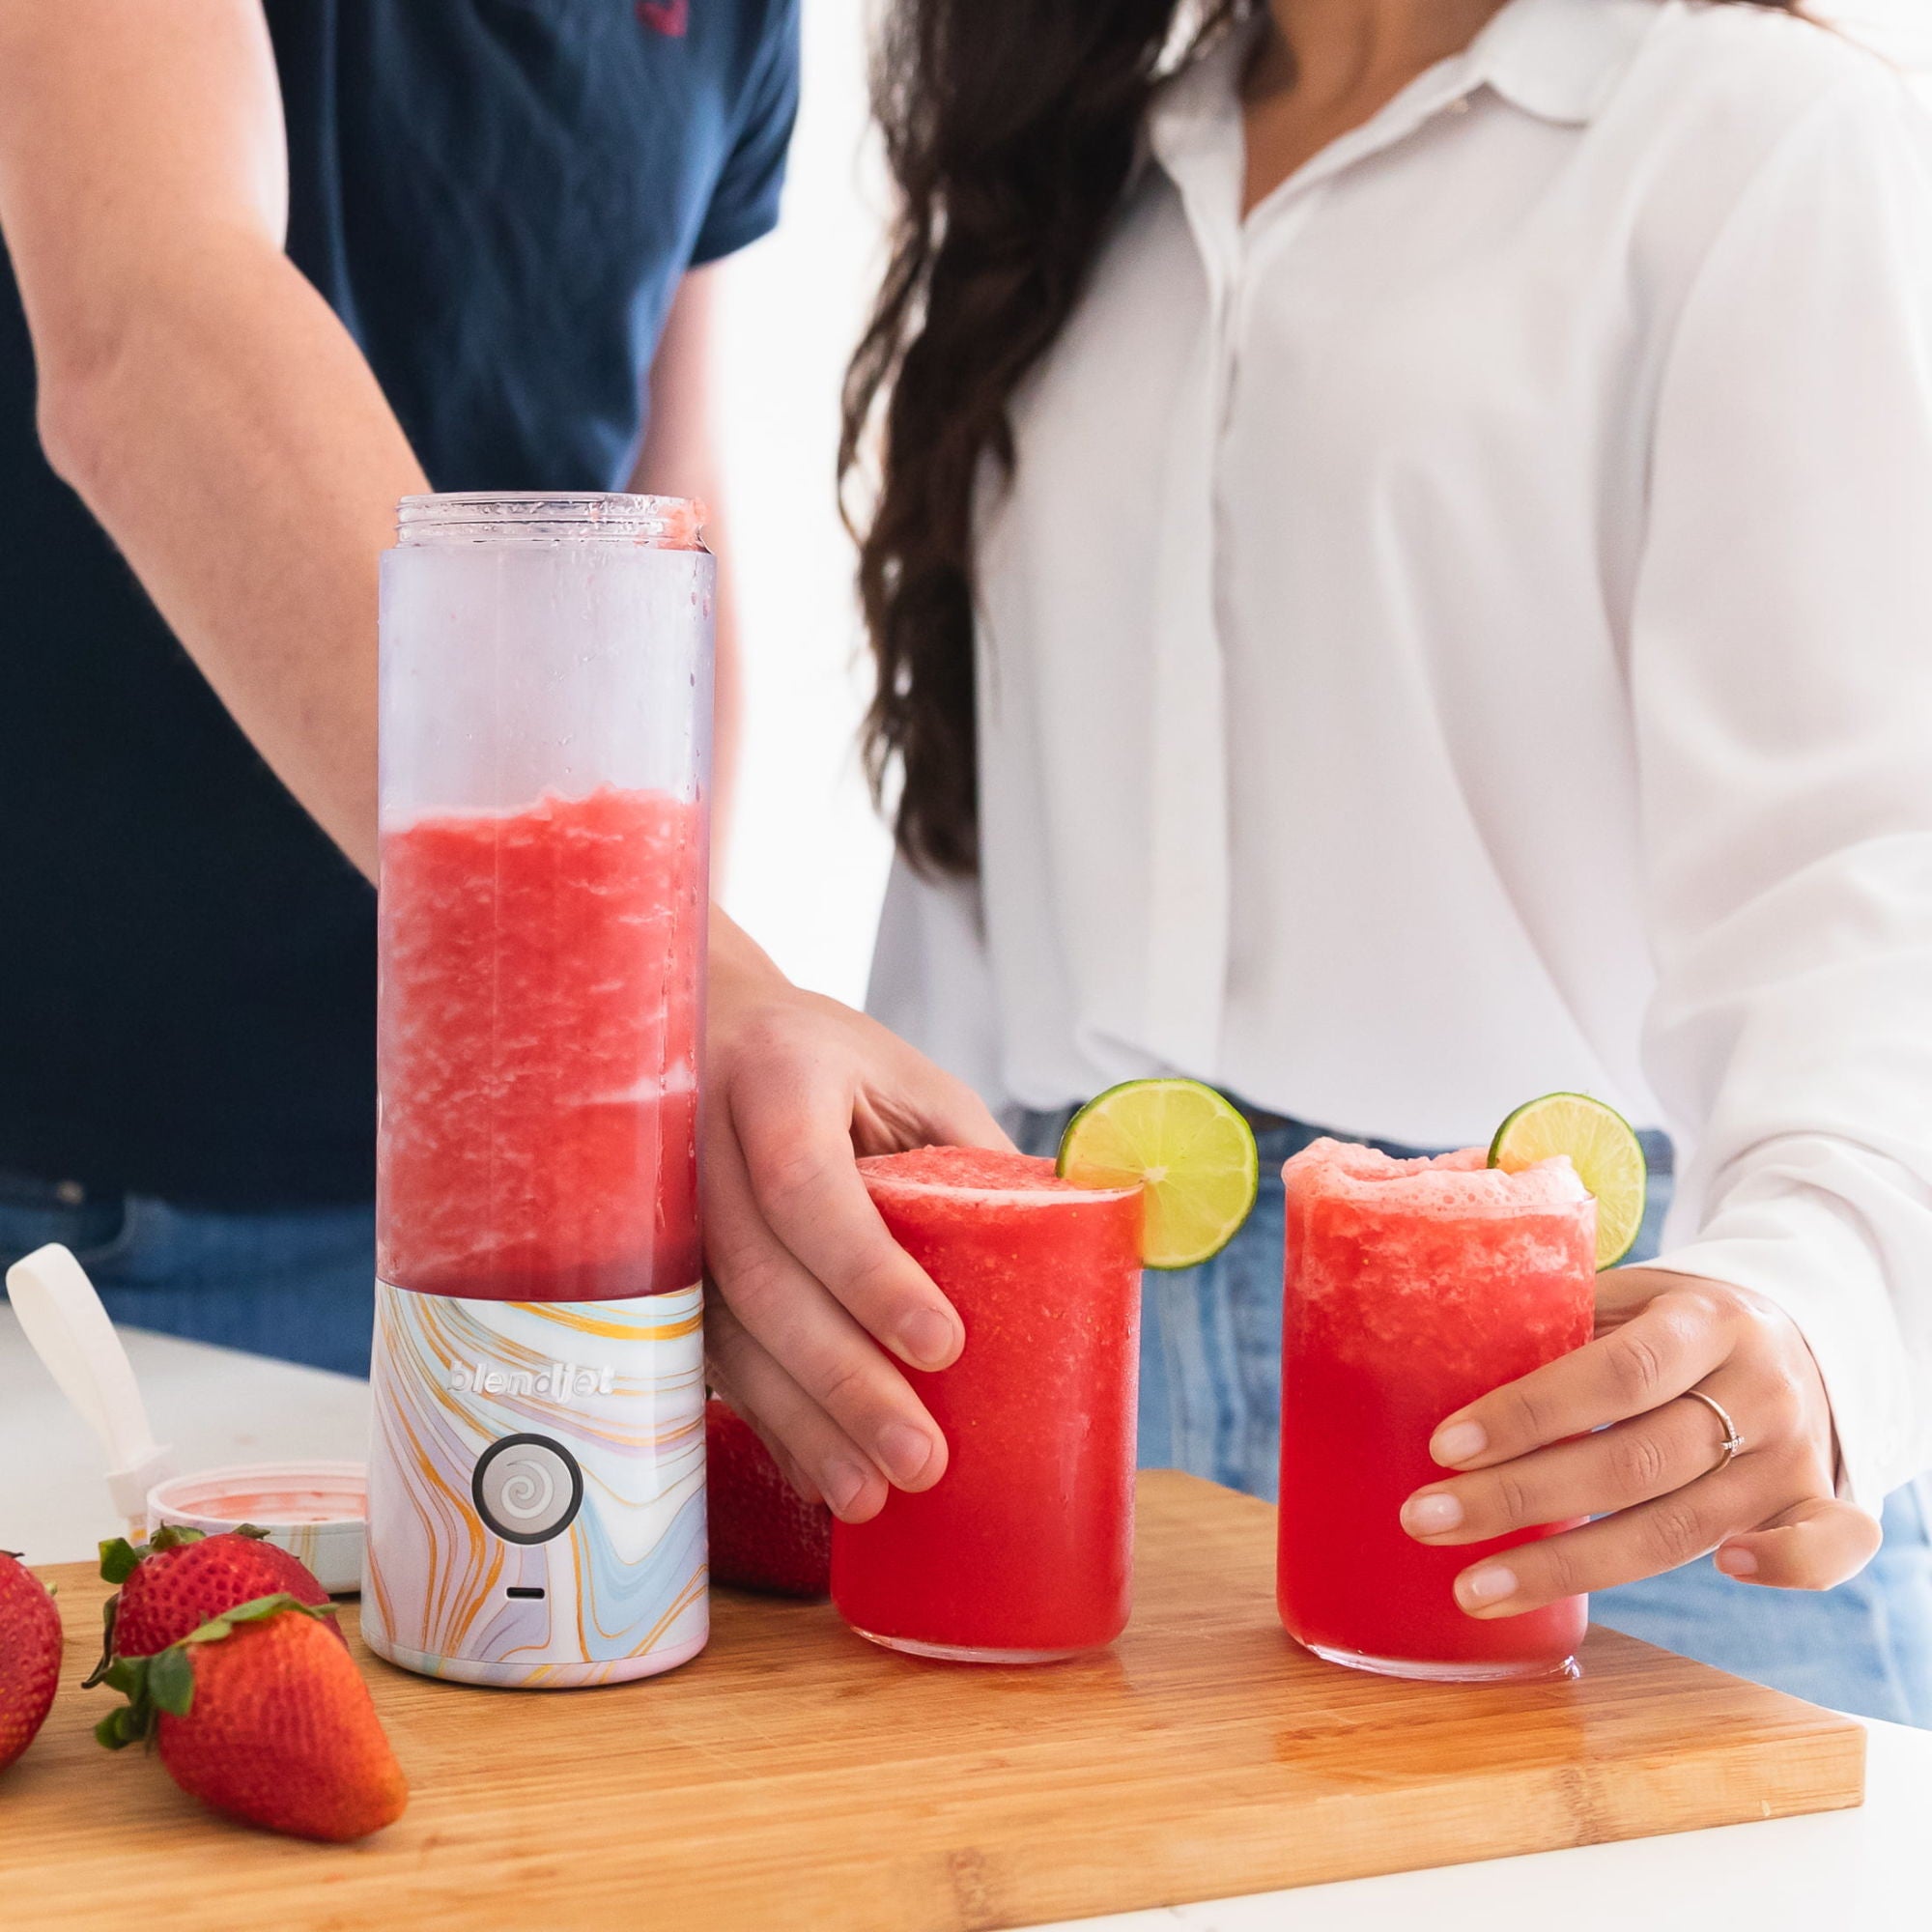 The Original Portable Blender, 20 oz, with a timer on it, perfect for healthy choices on the go.